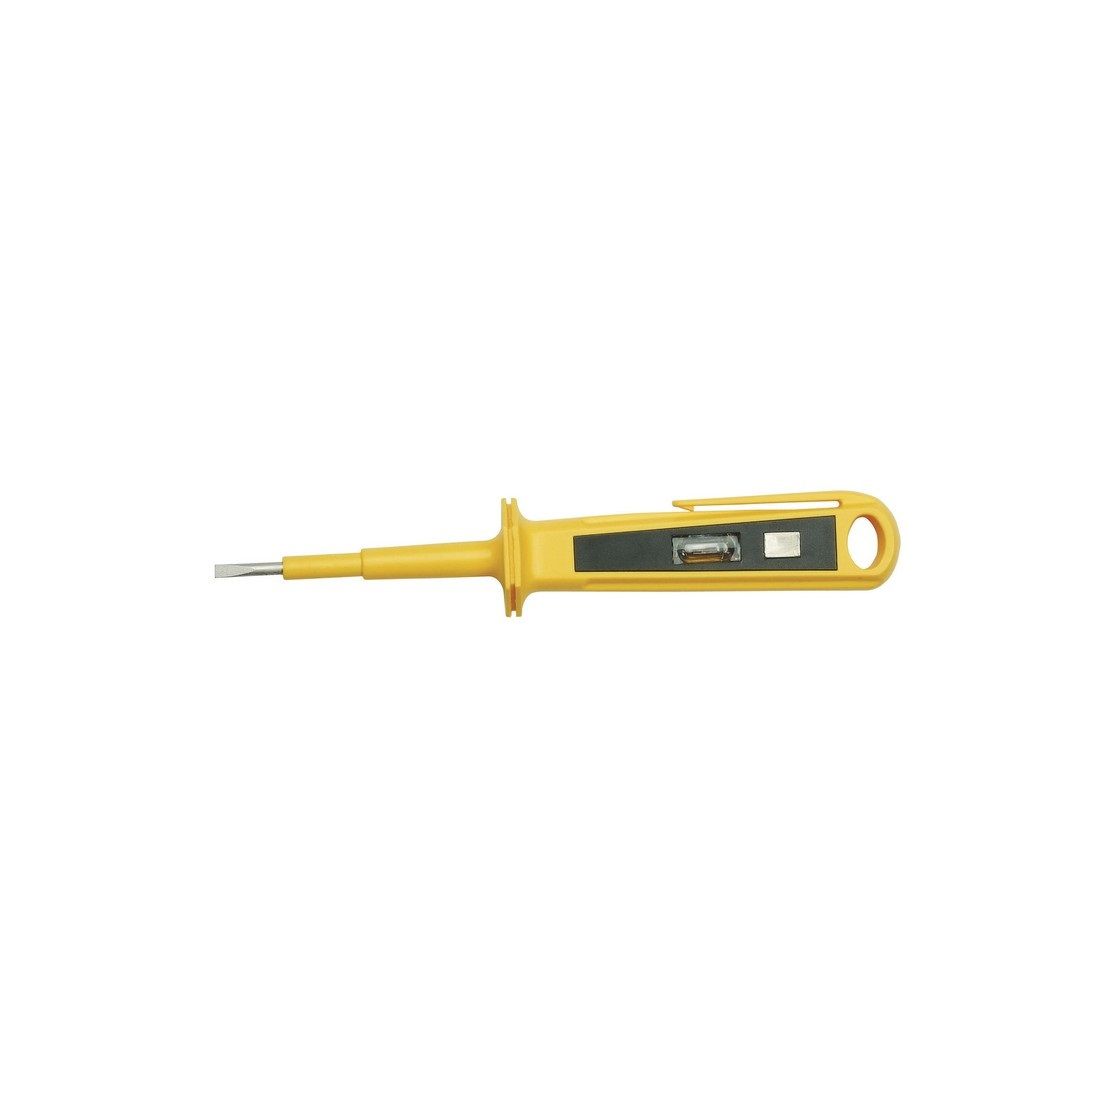 Proskit Screwdriver Probe Voltage Tester SD-328H (Pack of 2)